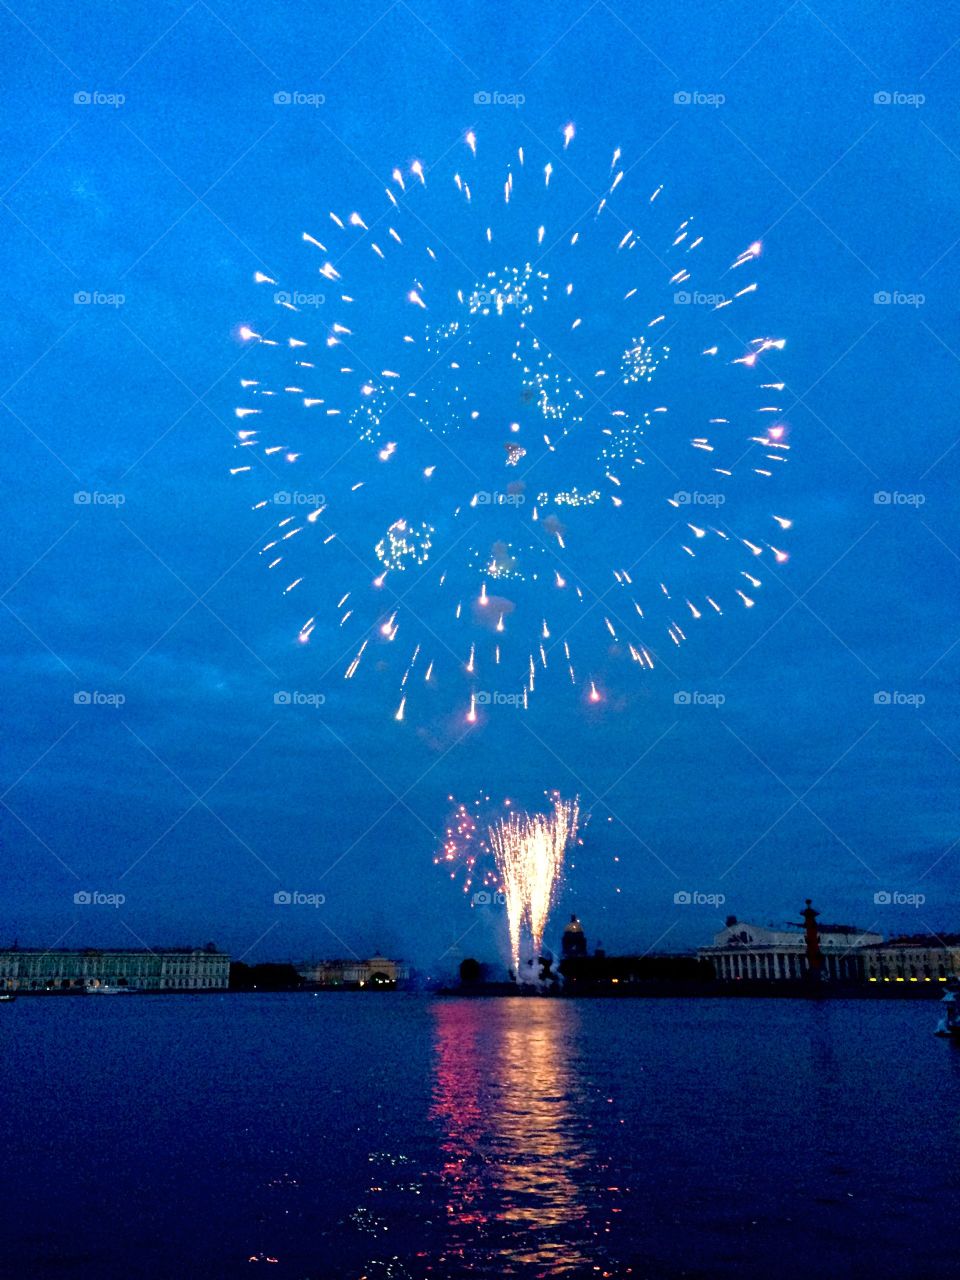 St. Petersburg eve . It was nice evening in St. Petersburg, Russia, when the fireworks appeared suddenly)